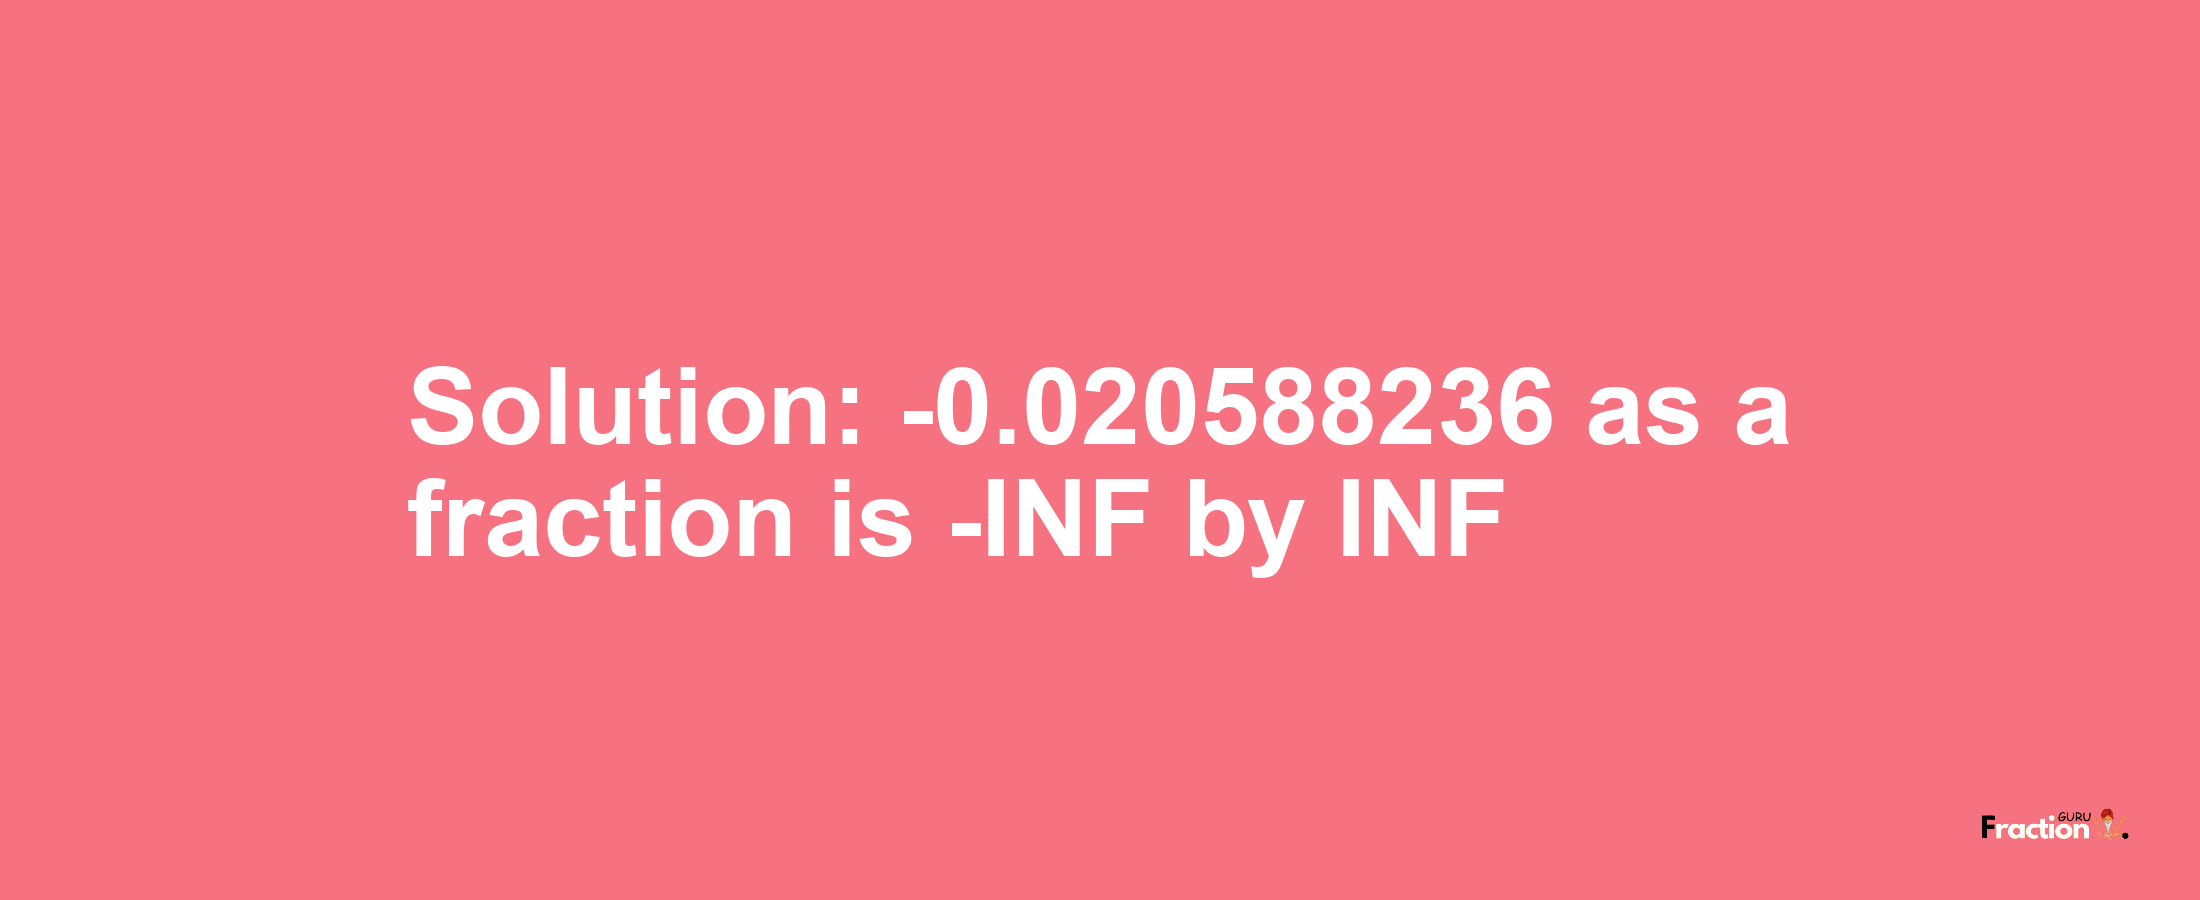 Solution:-0.020588236 as a fraction is -INF/INF